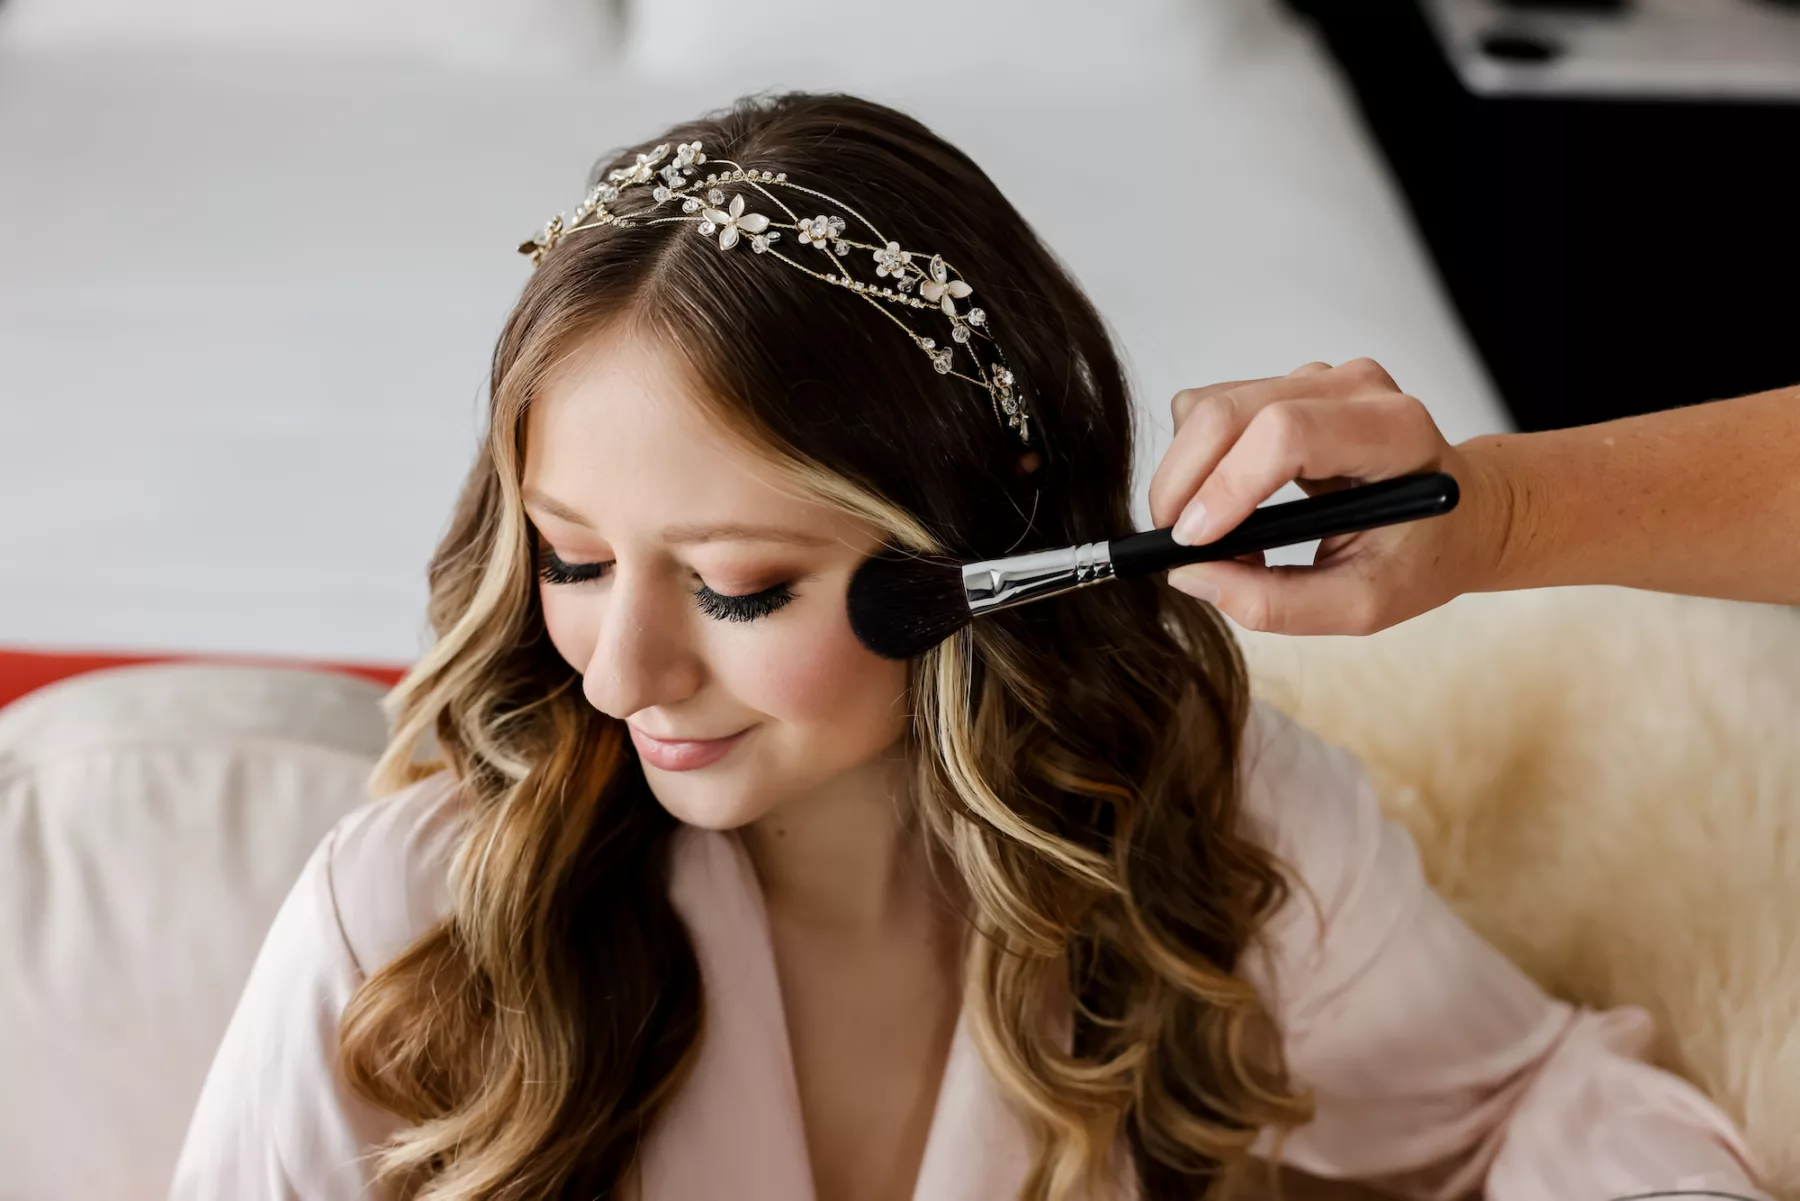 Bride Getting Ready Wedding Portrait | Crystal Flower Headband Bridal Accessory | Tampa Bay Hair and Makeup Artist Adore Bridal Services | Photographer Lifelong Photography Studio